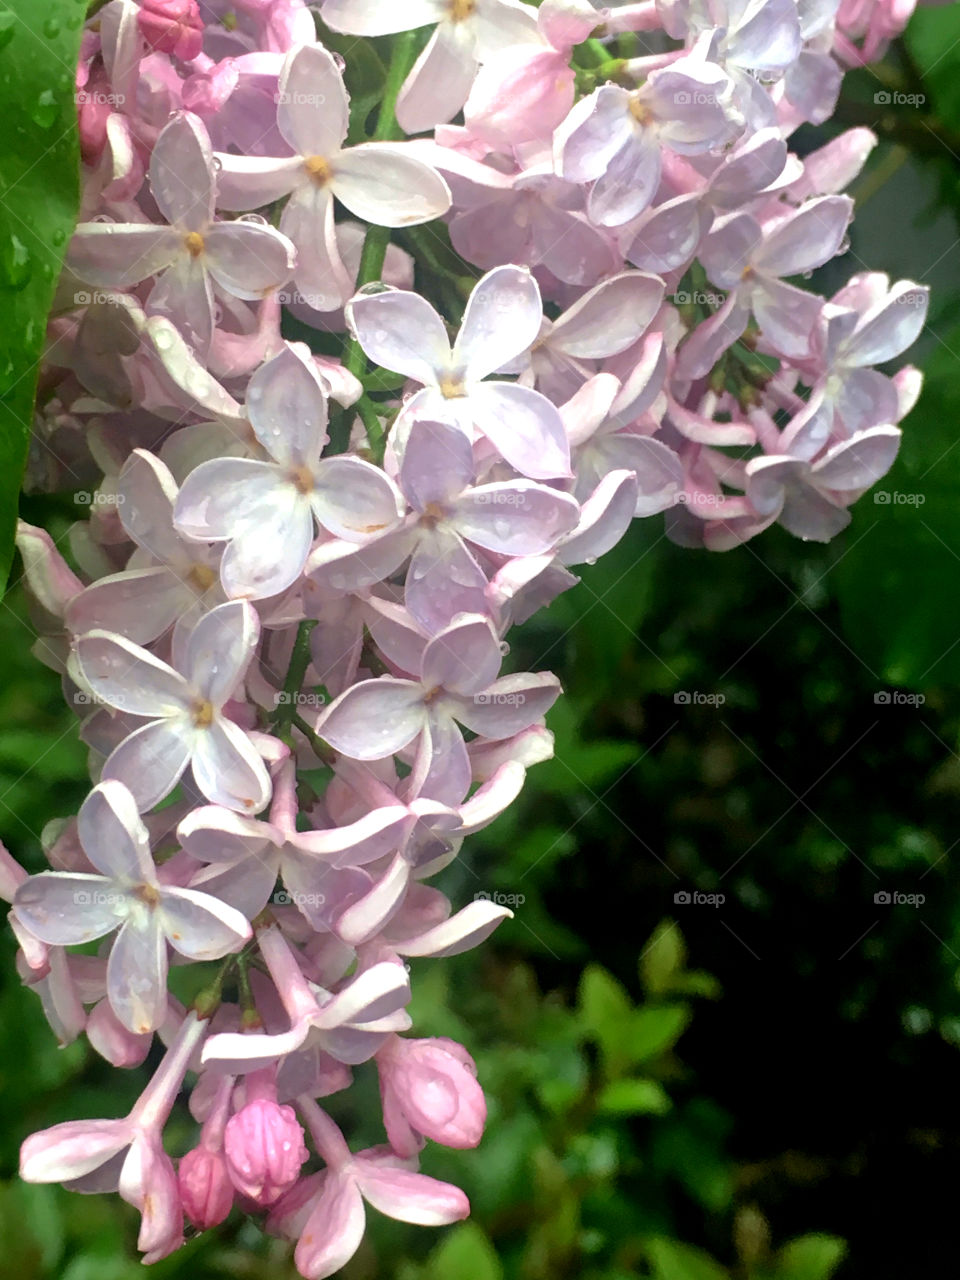 Raindrops on the flowers lilacs 